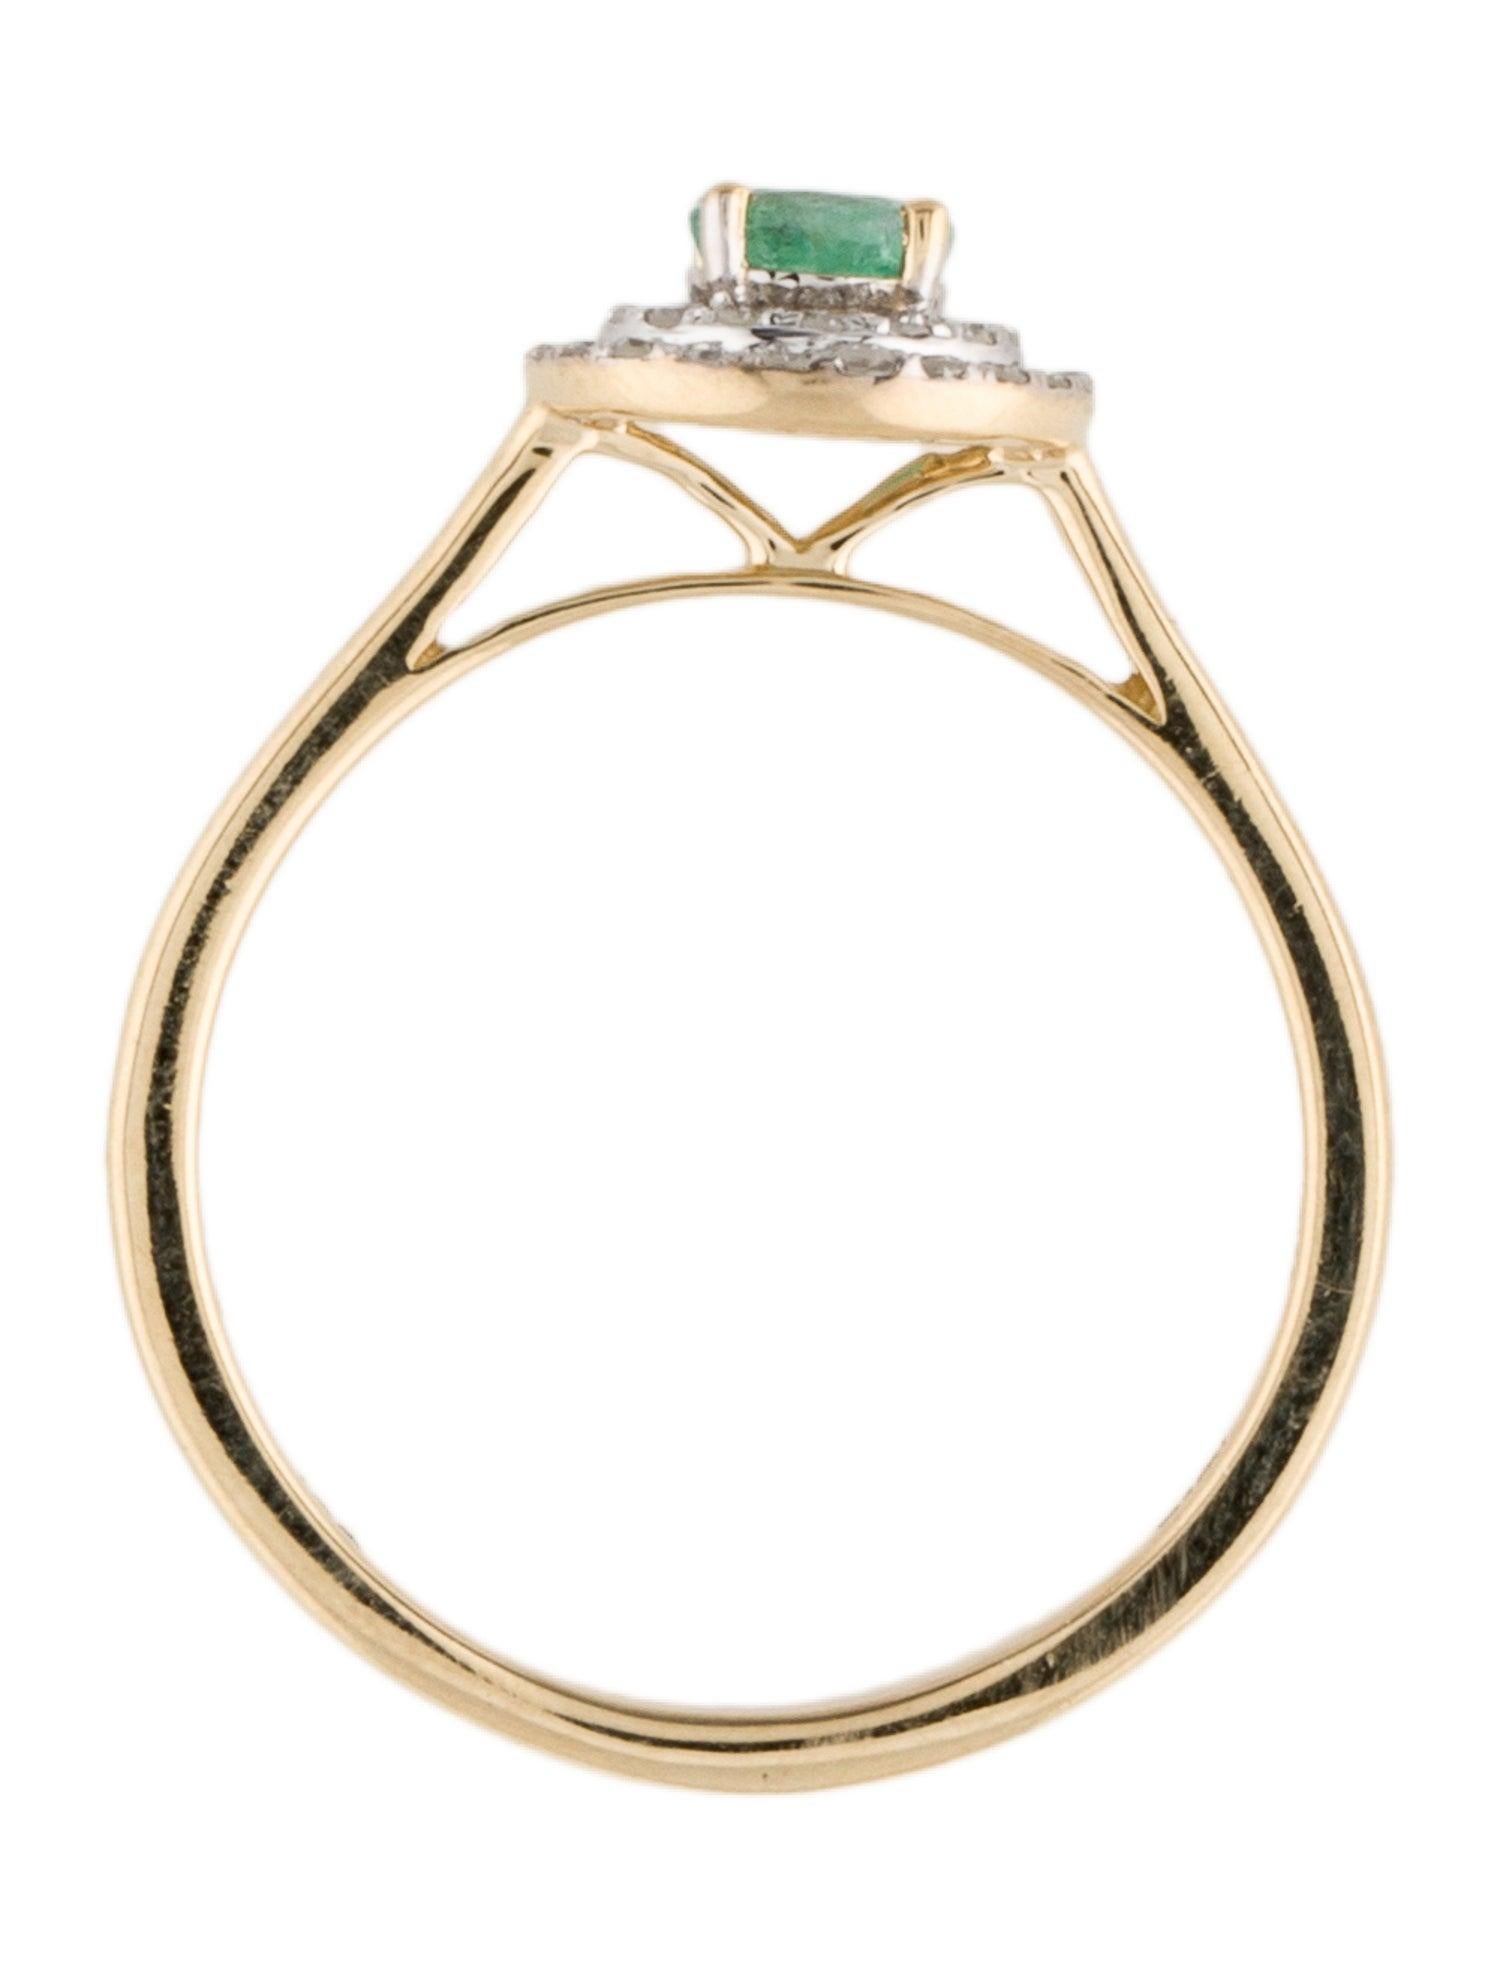 Elegant 14K Emerald & Diamond Cocktail Ring - Size 6.5  Vintage Gemstone Ring In New Condition For Sale In Holtsville, NY